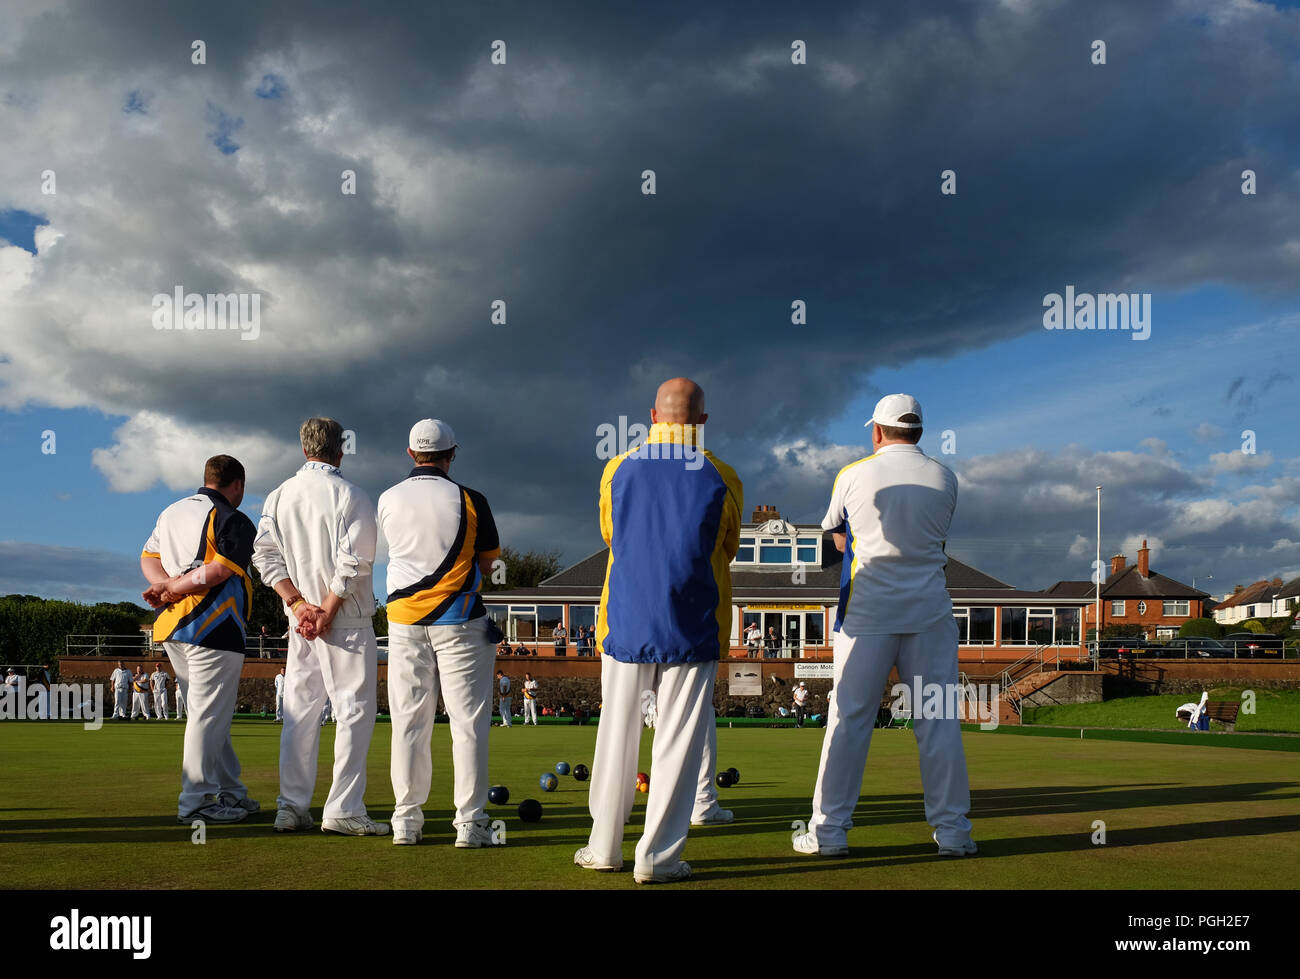 Bowlers at Whitehead Bowling Green, Northern Ireland Stock Photo